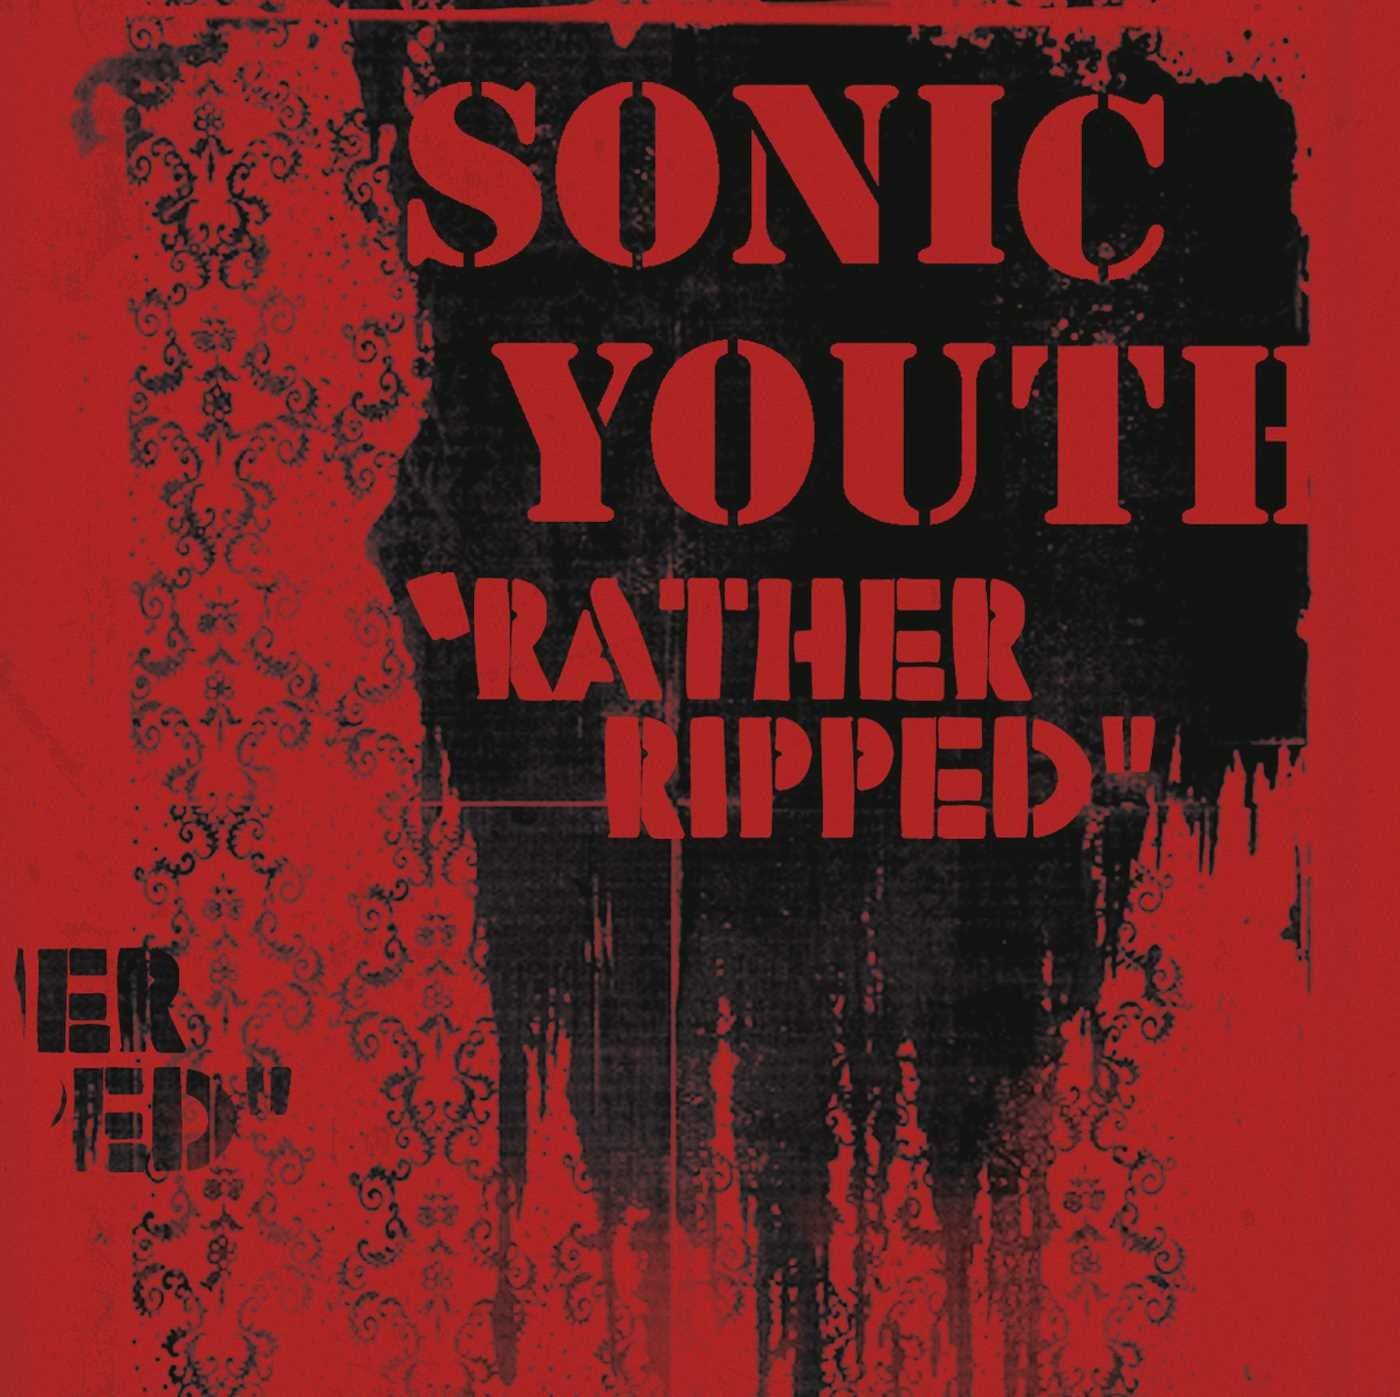 Sonic Youth Rather Ripped